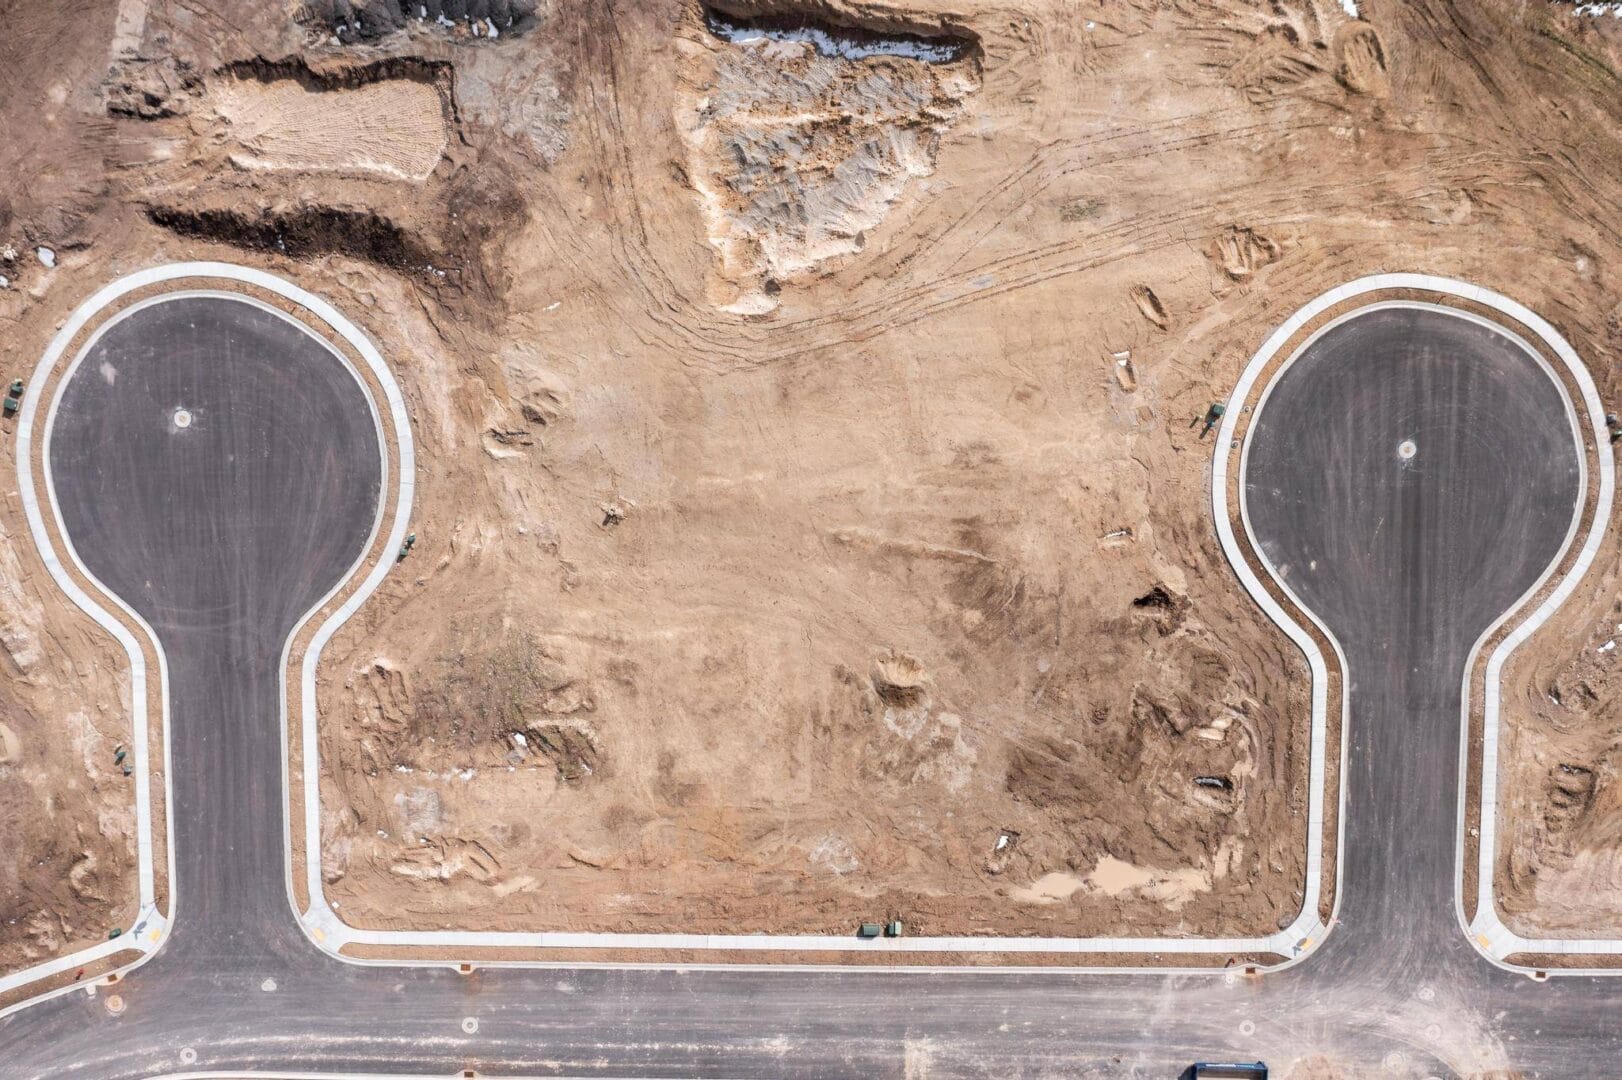 An aerial view of a construction site in Southern Utah Valley.